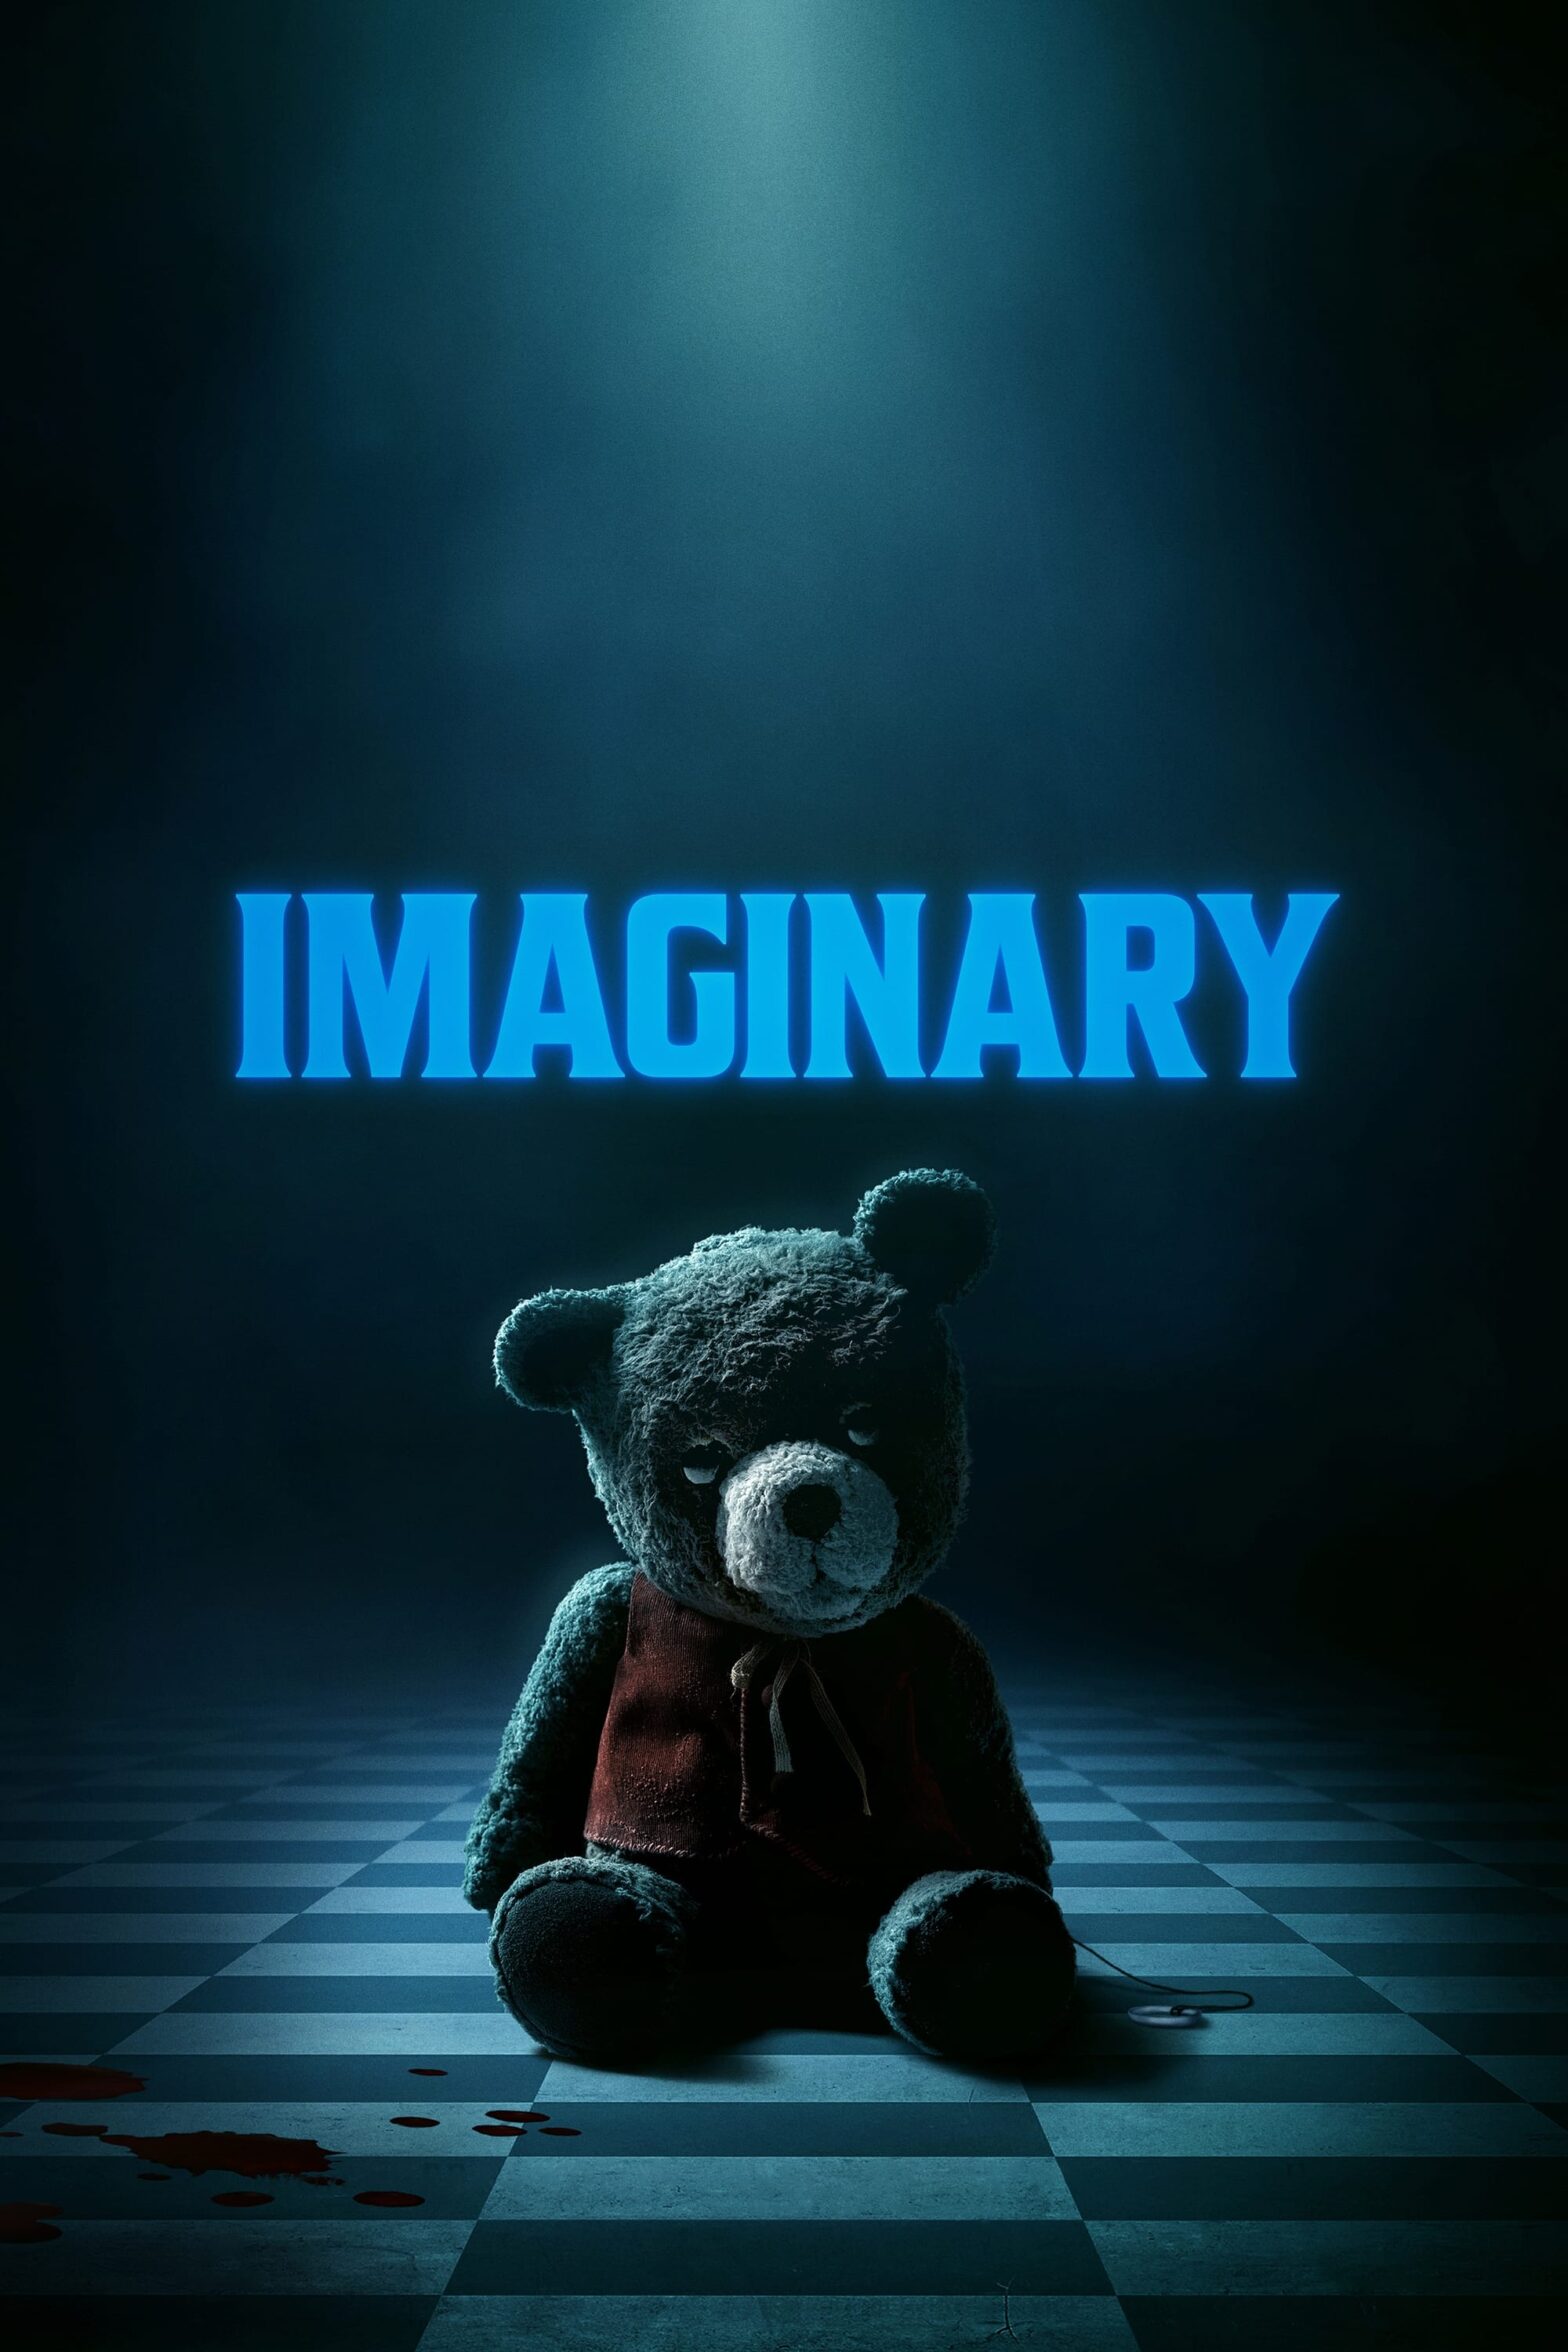 Poster for the movie "Imaginary"